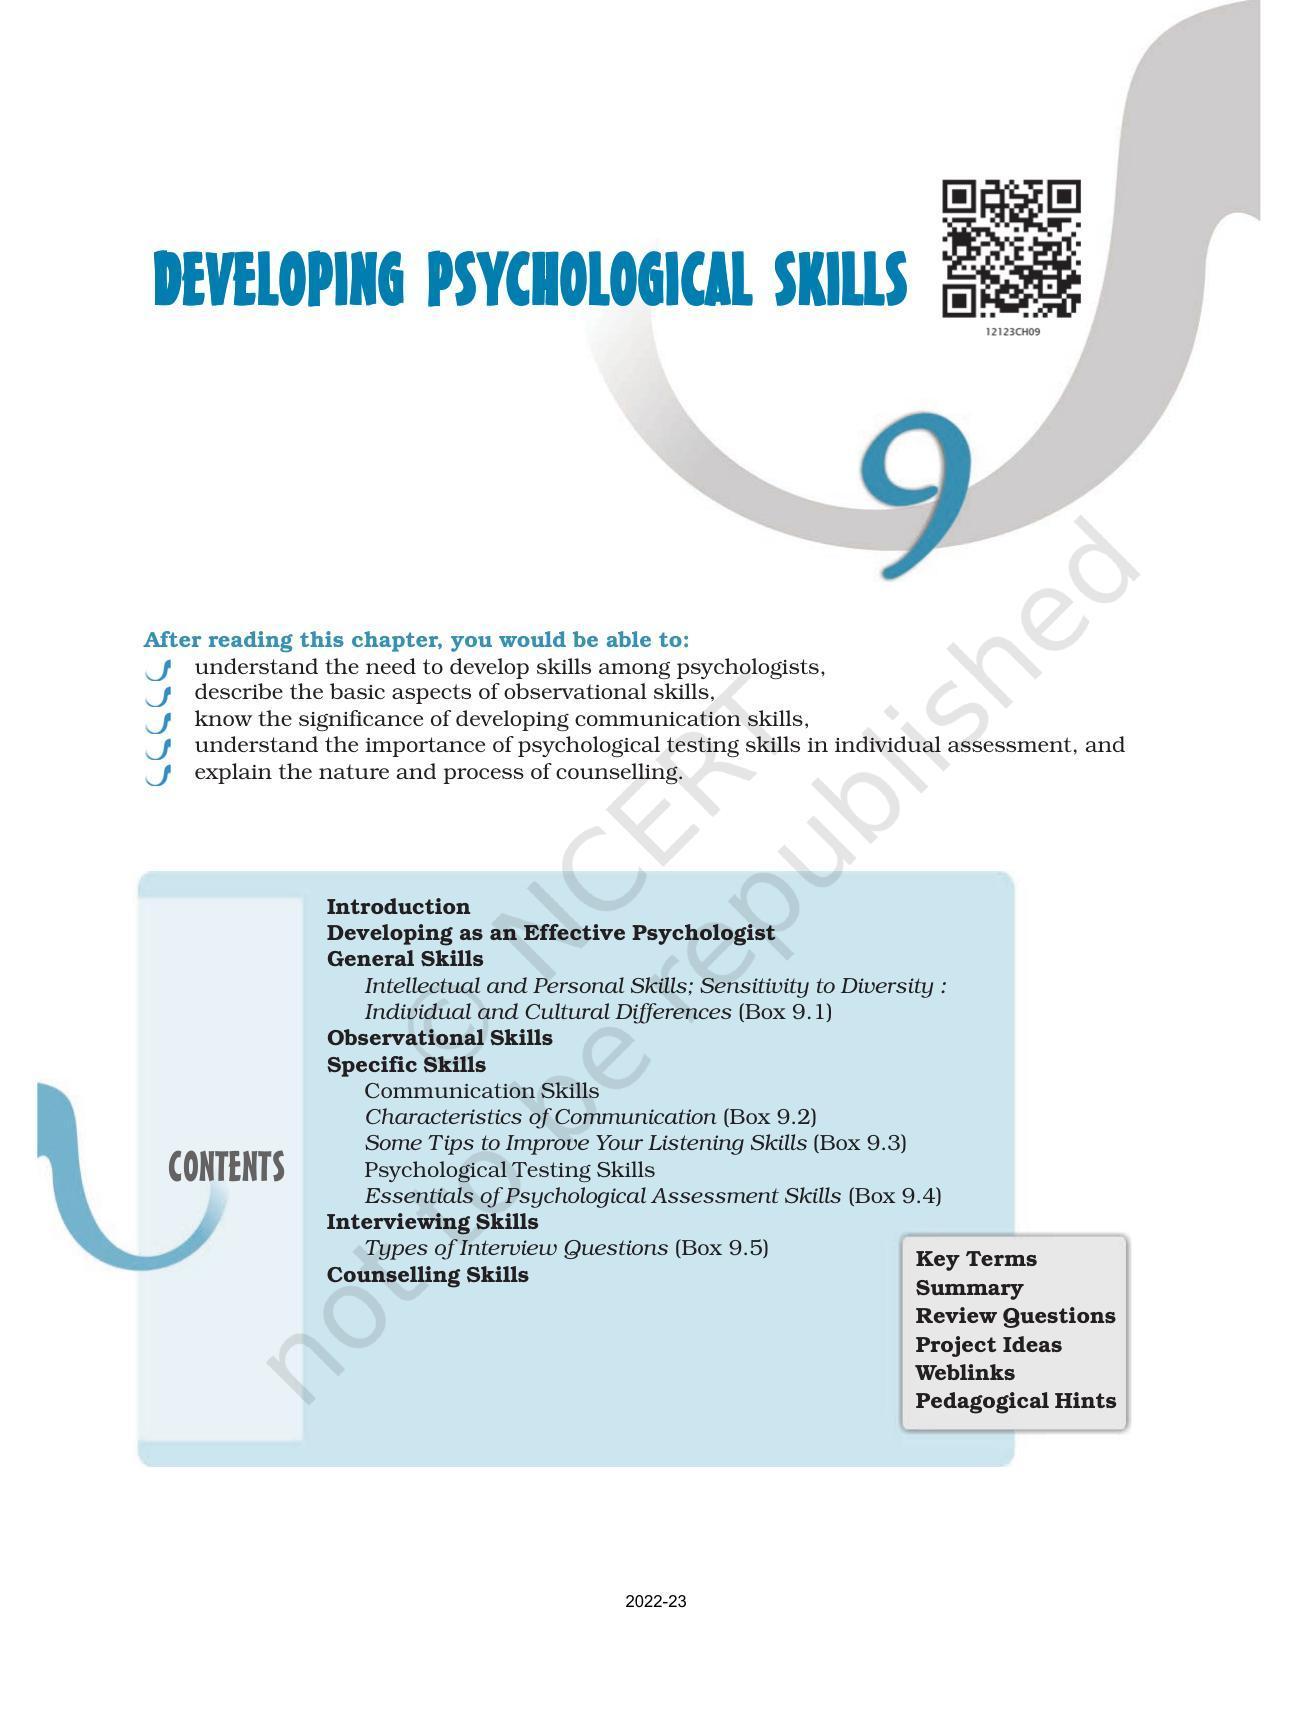 NCERT Book for Class 12 Psychology Chapter 9 Developing Psychological Skills - Page 1